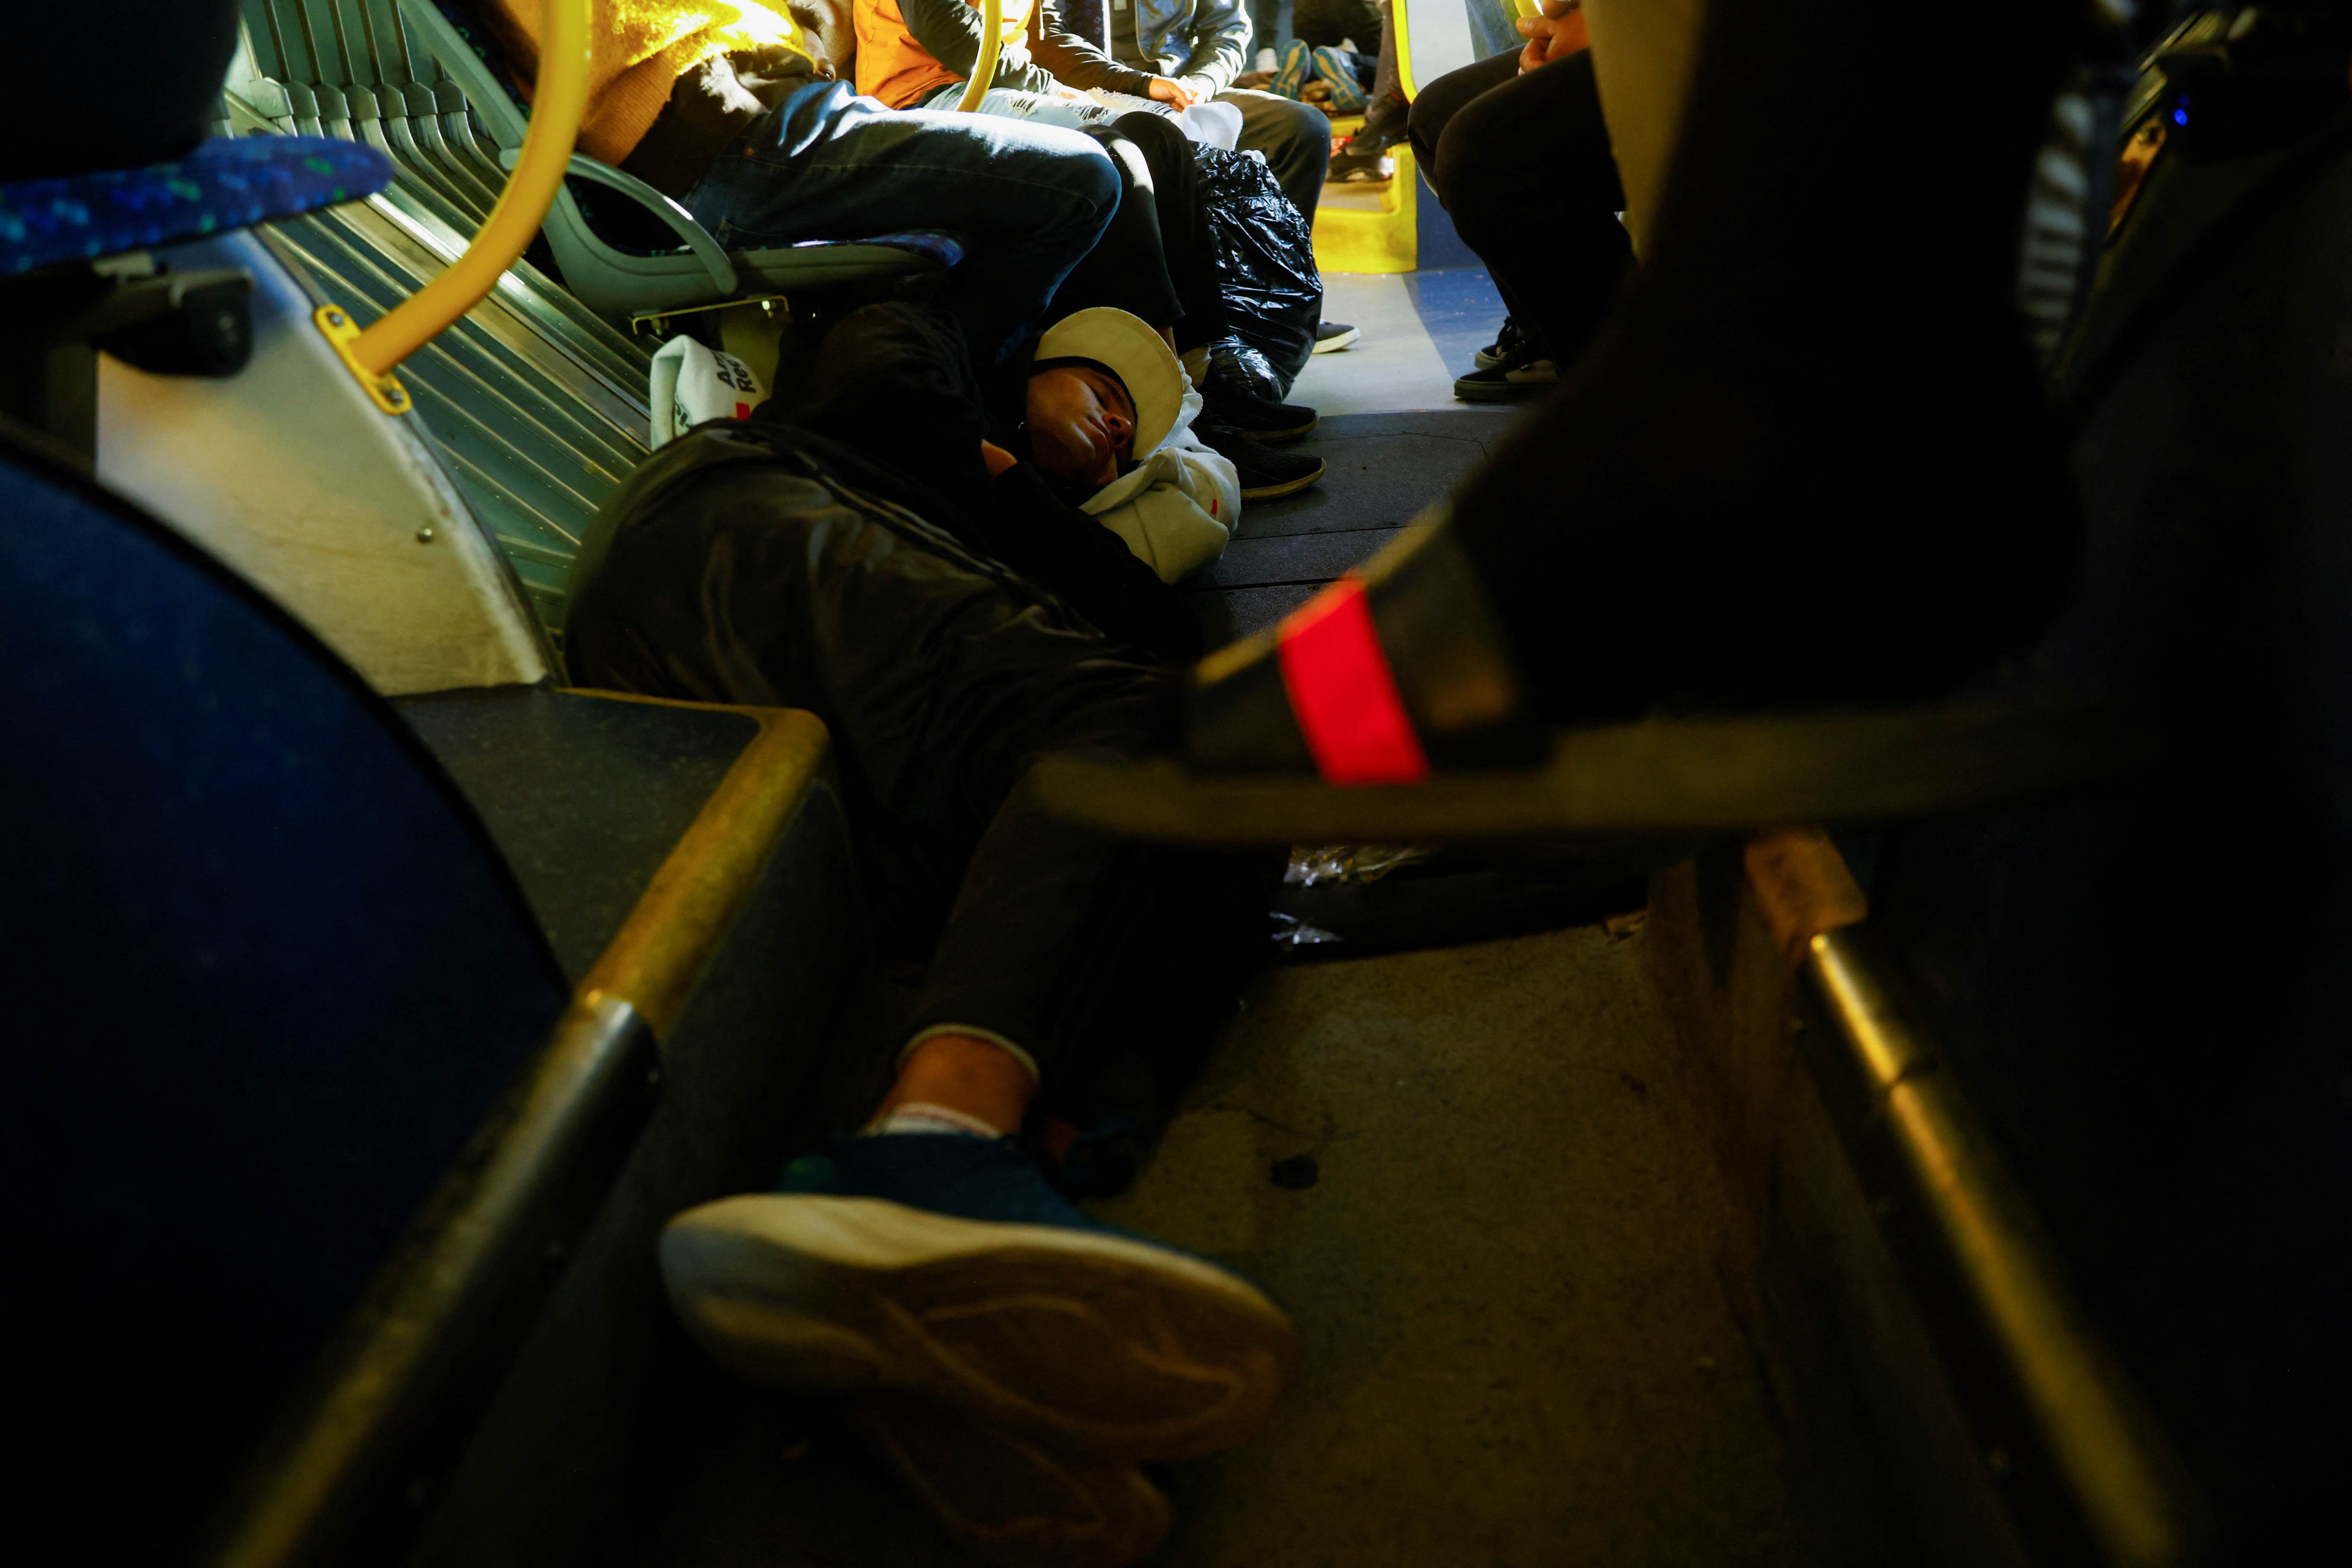 Migrants rest in a bus on the day that U.S. President Biden and first lady Jill Biden visit El Paso